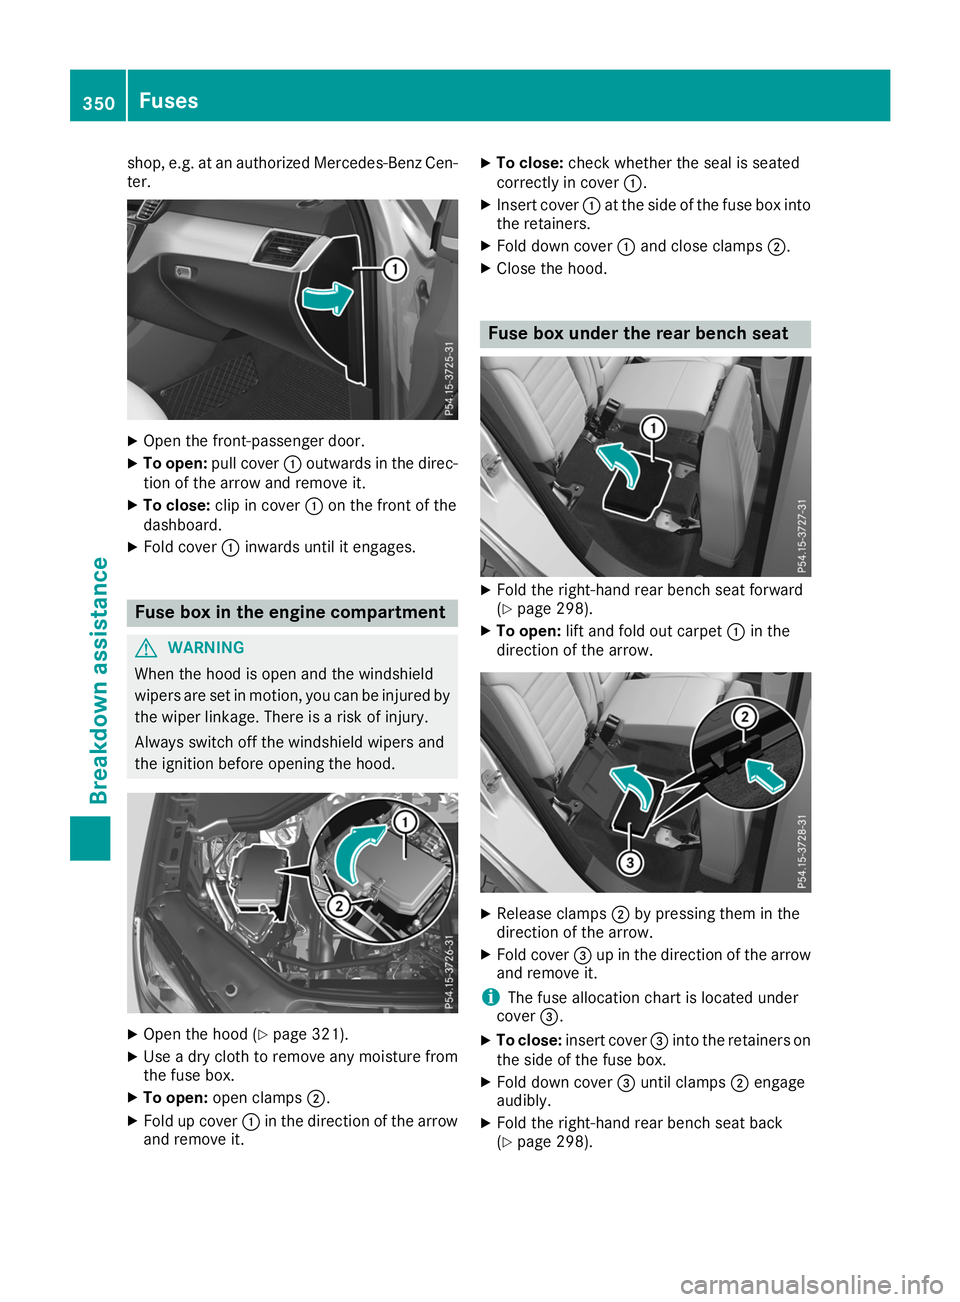 MERCEDES-BENZ GLE 2019  Owners Manual shop, e.g. at an authorized Mercedes-Benz Cen-
ter. X
Open the front-passenger door.
X To open: pull cover 0043outwards in the direc-
tion of the arrow and remove it.
X To close: clip in cover 0043on 